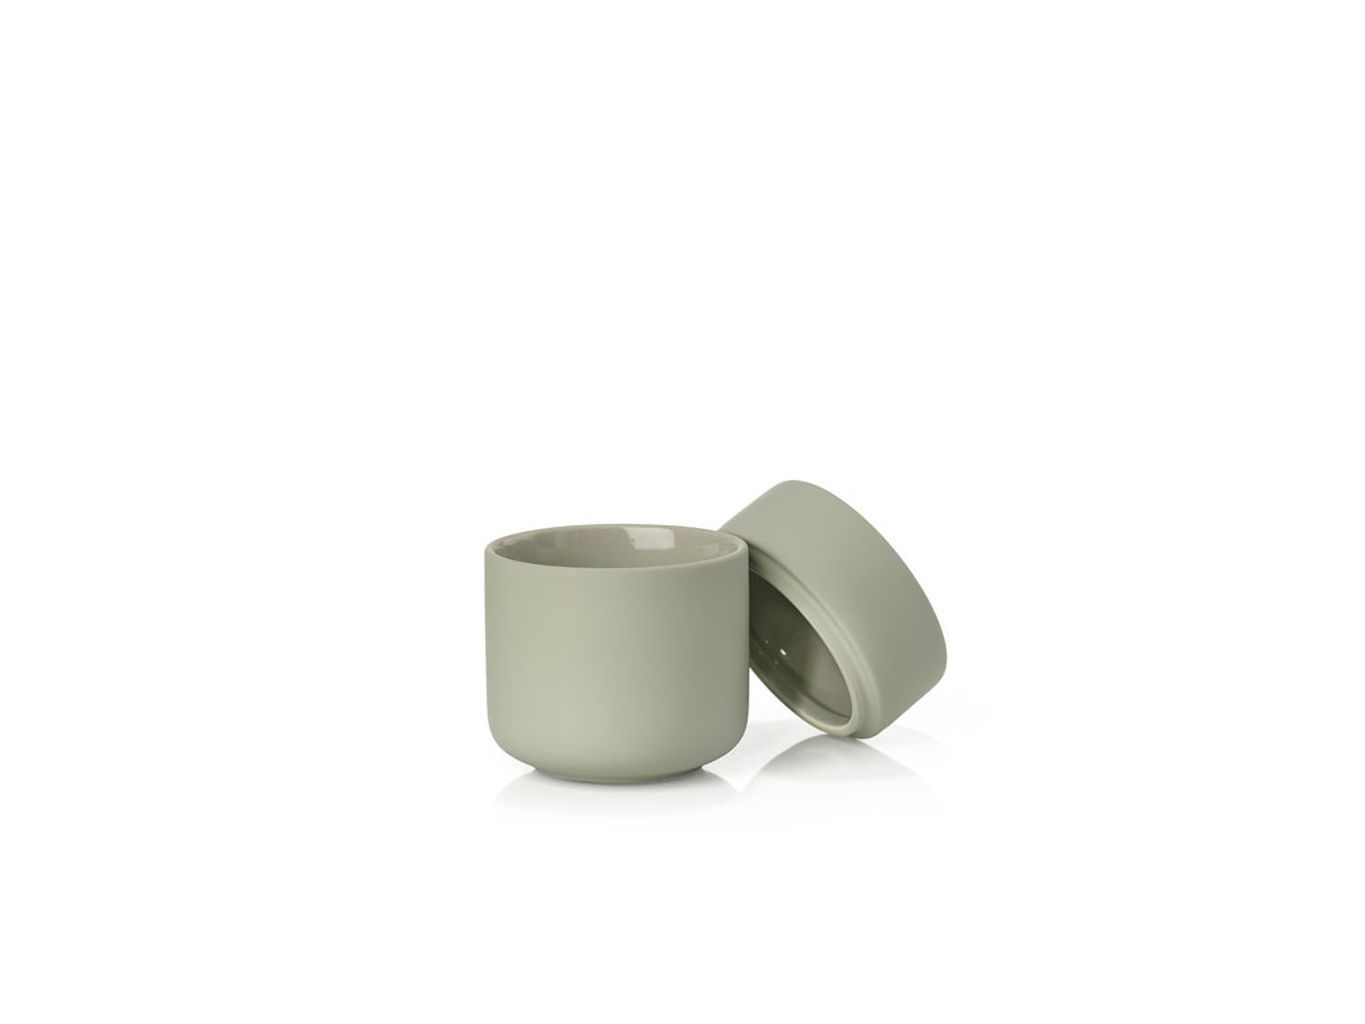 Zone Denmark Ume Cotton Swabs And Cosmetic Pads Container øx H 8,3x10,3 Cm, Eucalyptus Green